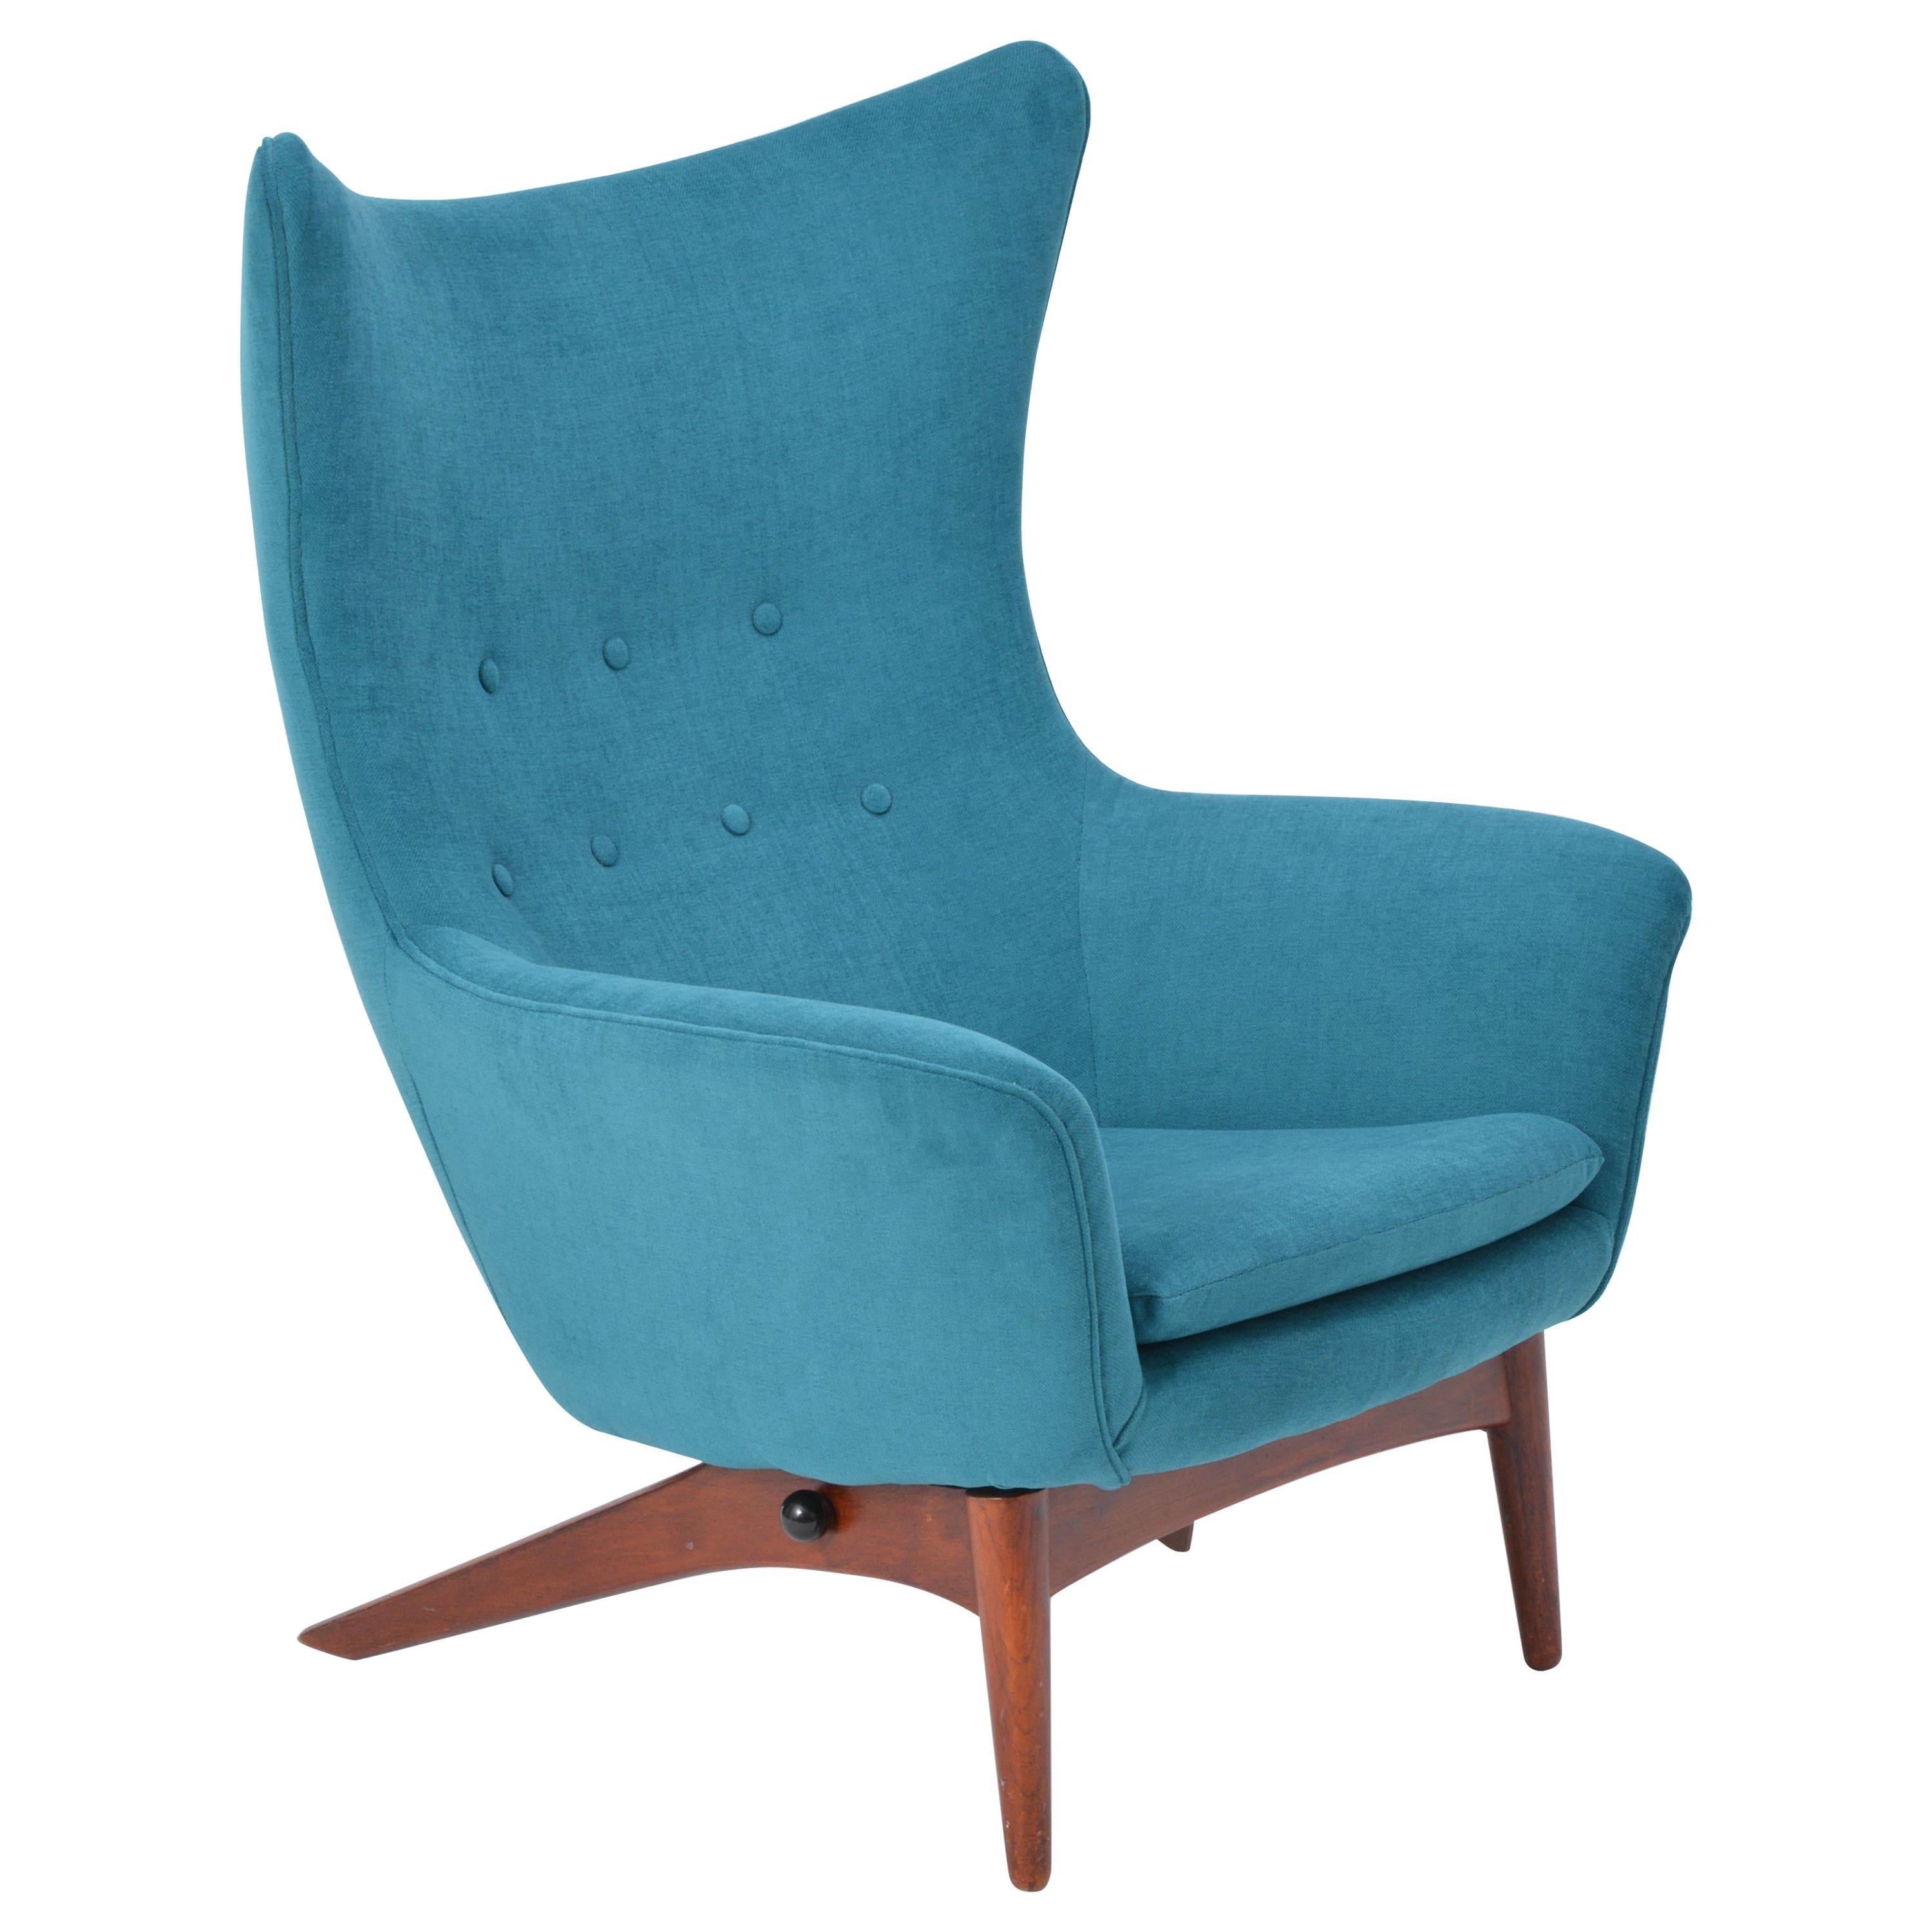 Reupholstered Danish Mid-Century reclining chair designed by Henry Walter Klein